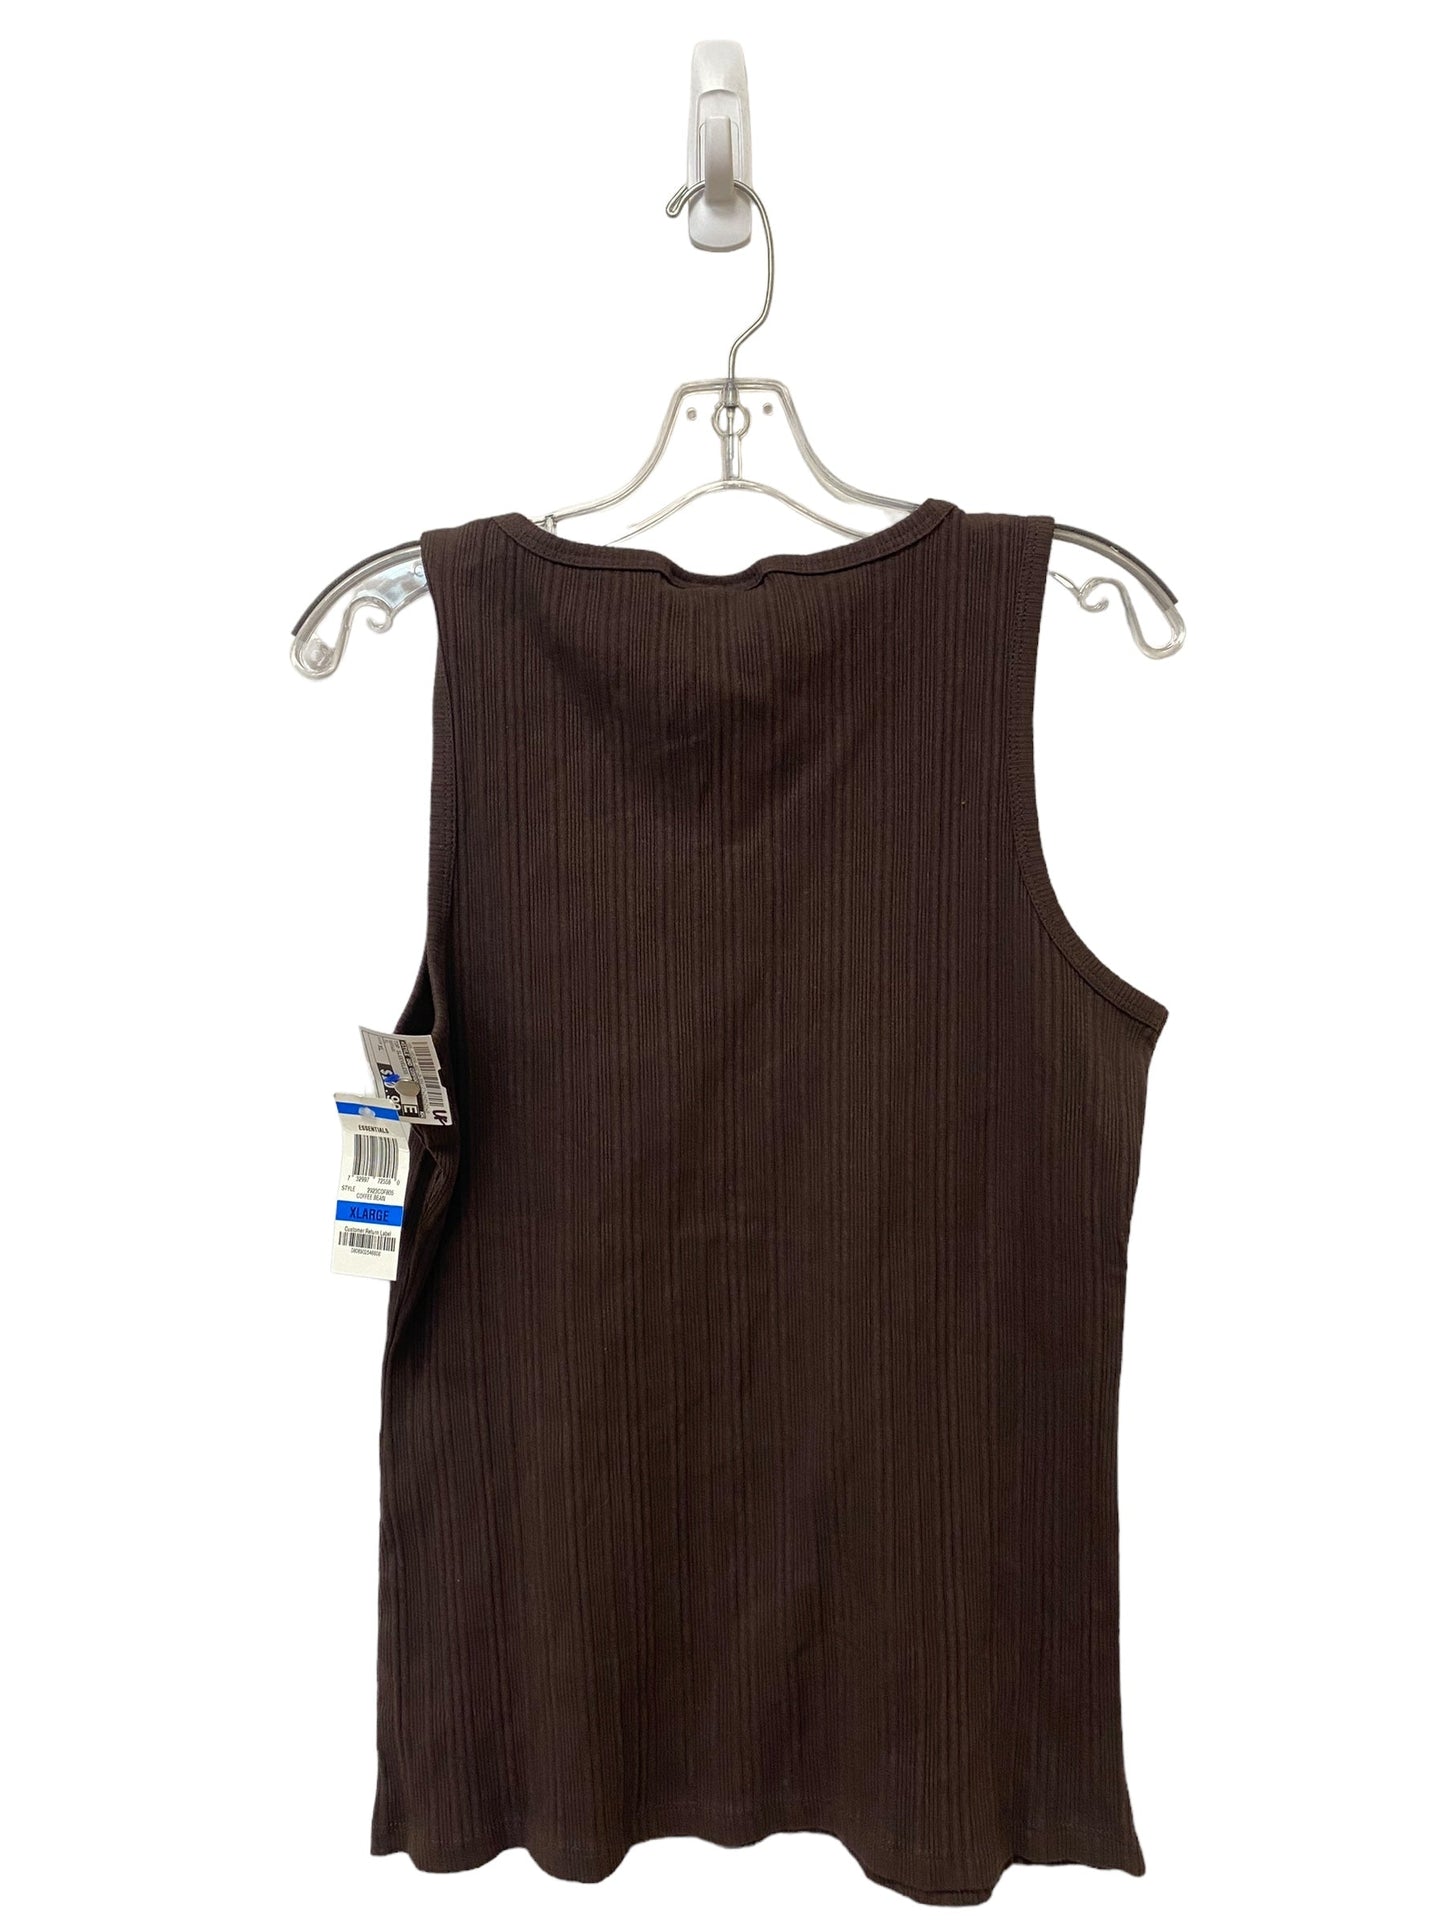 Top Sleeveless By Style And Company  Size: Xl